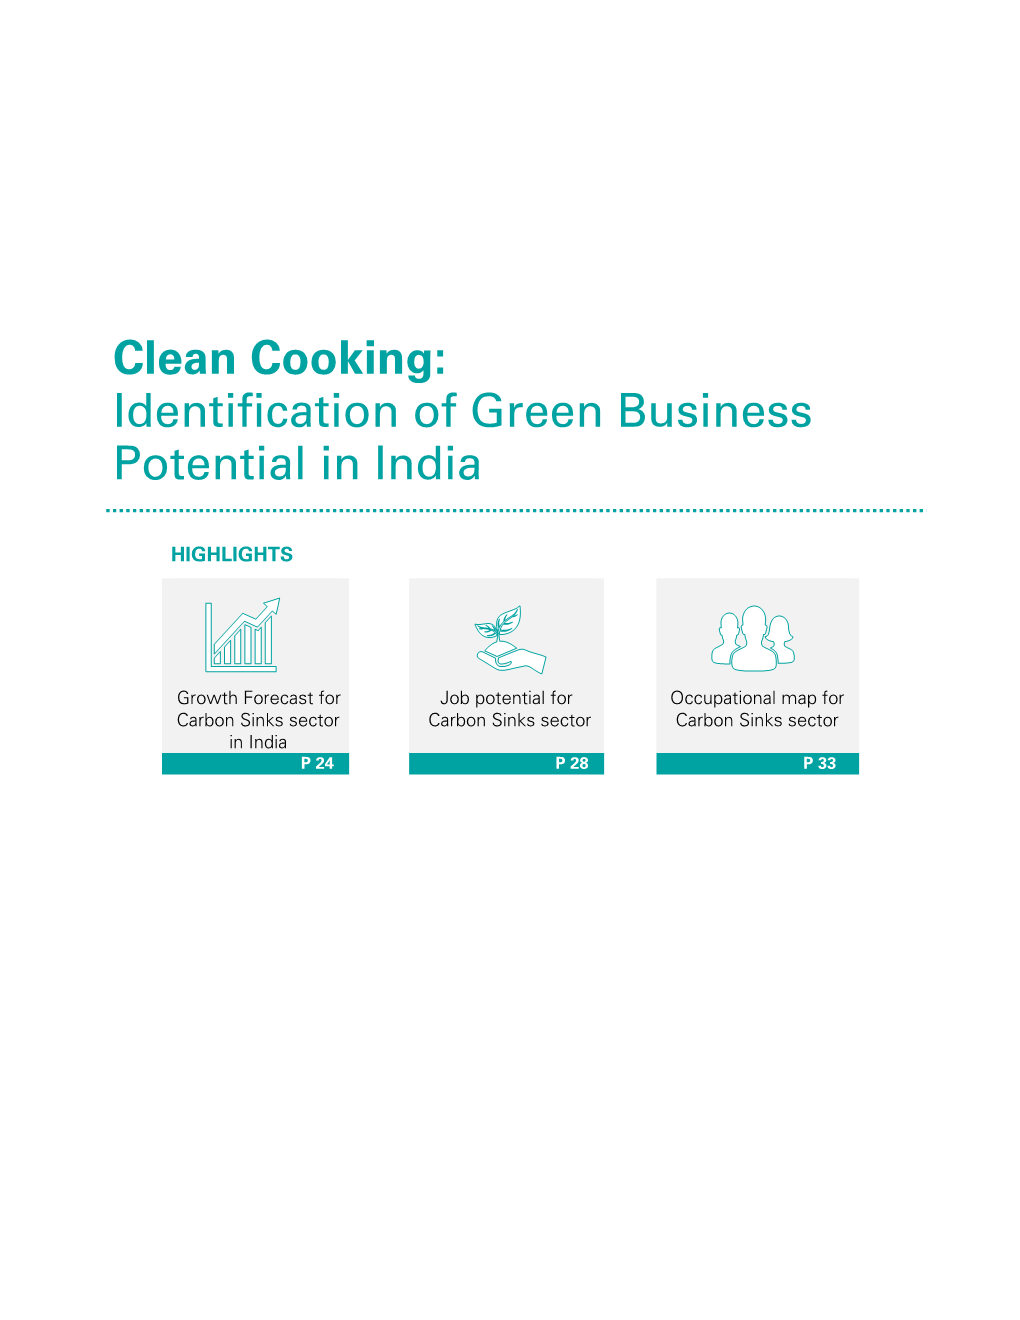 Clean Cooking: Identification of Green Business Potential in India